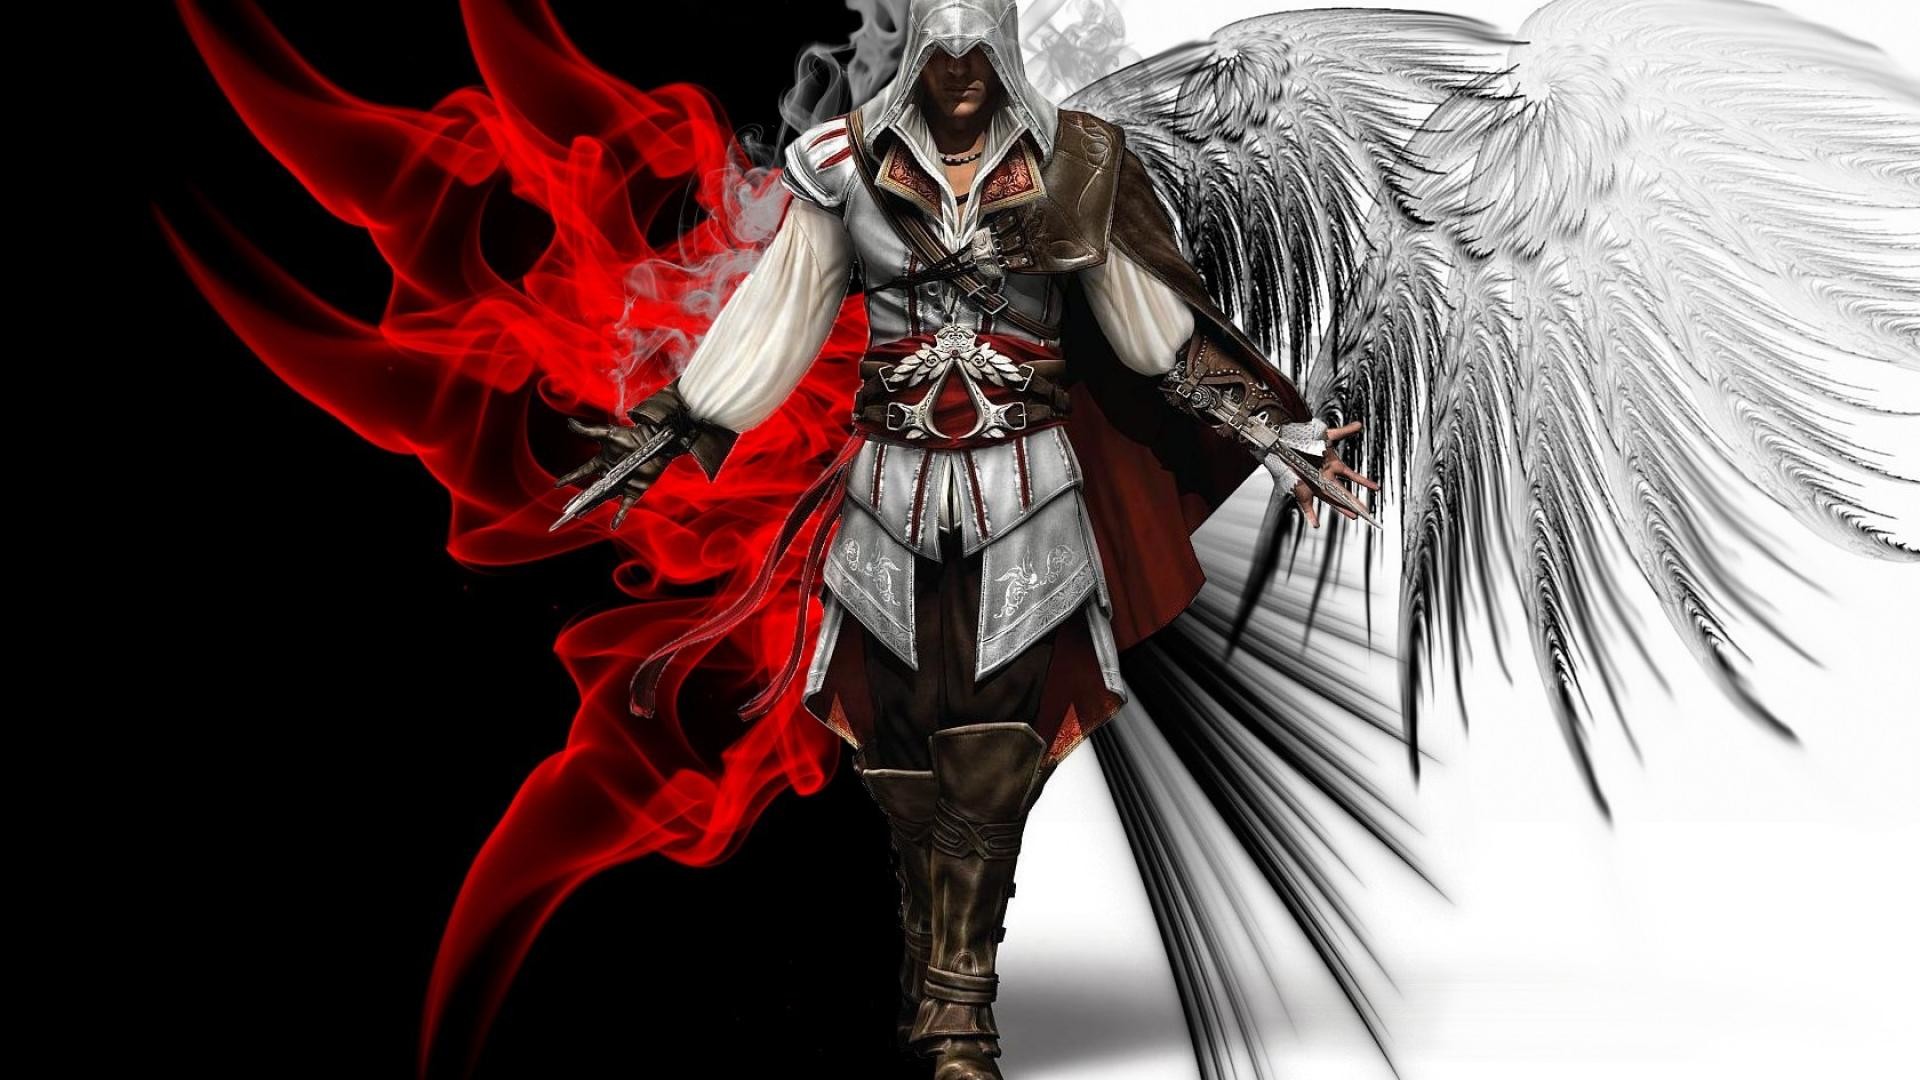 1920x1080 ... Wallpapers for  Wings assassins creed wallpaper (106852)